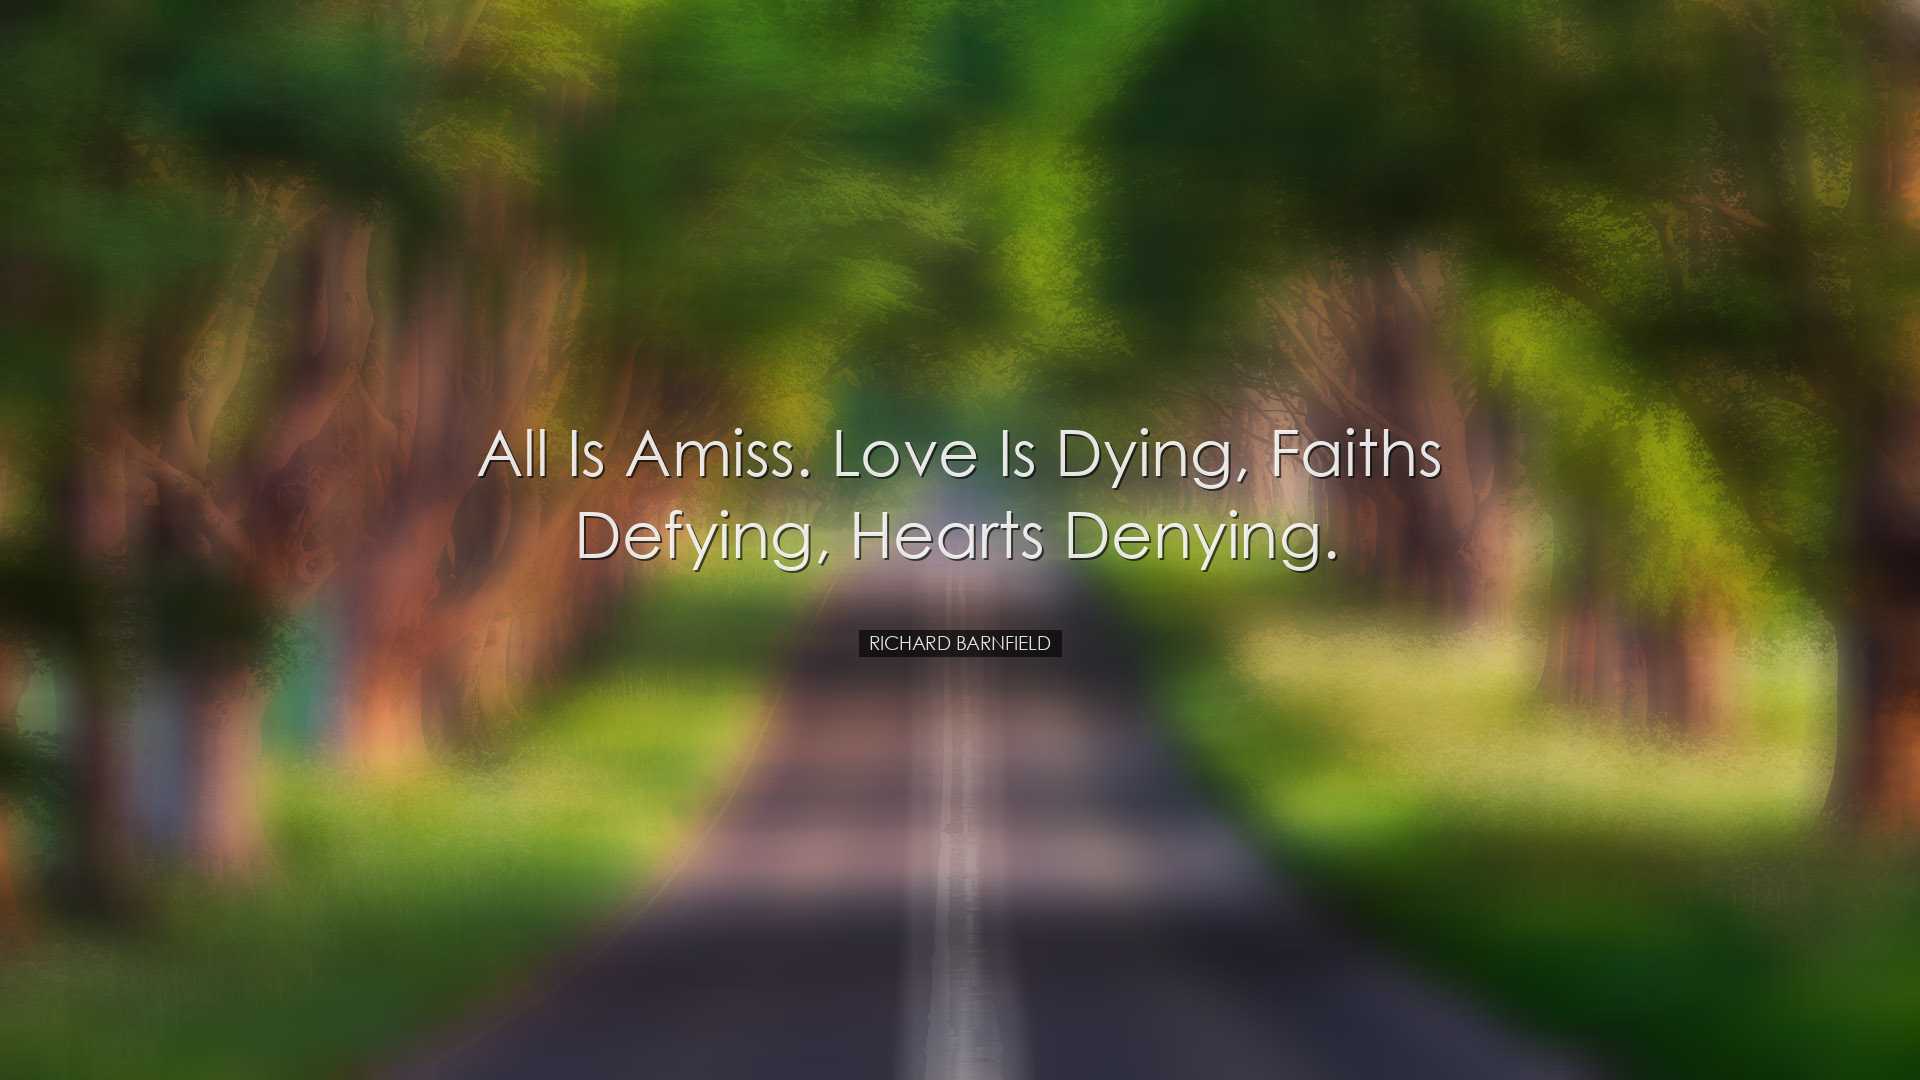 All is amiss. Love is dying, faiths defying, hearts denying. - Ric